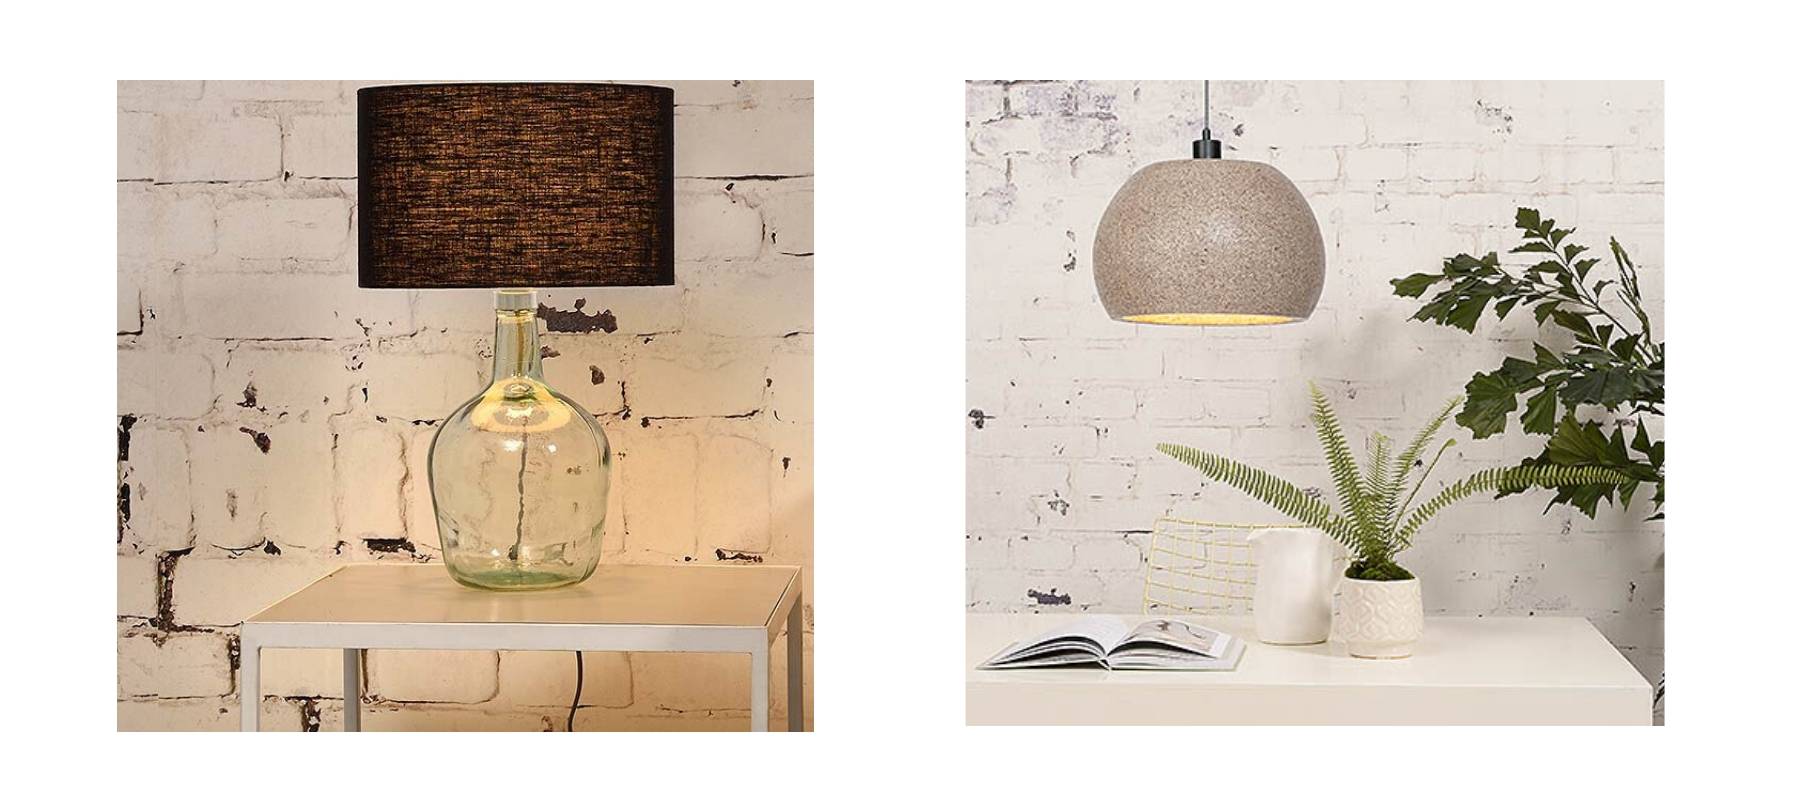 Glass table lamp with dark shade and woodchip hanging lights